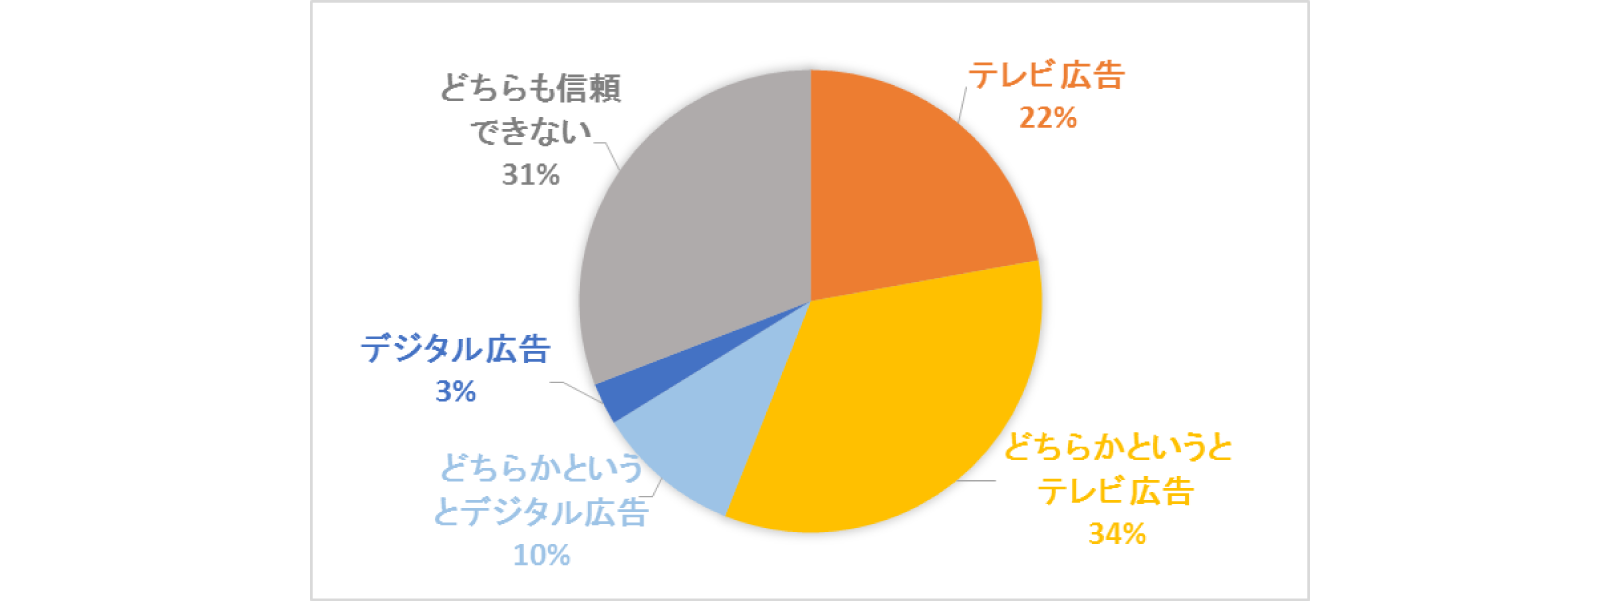 201812-06-fig-01.png